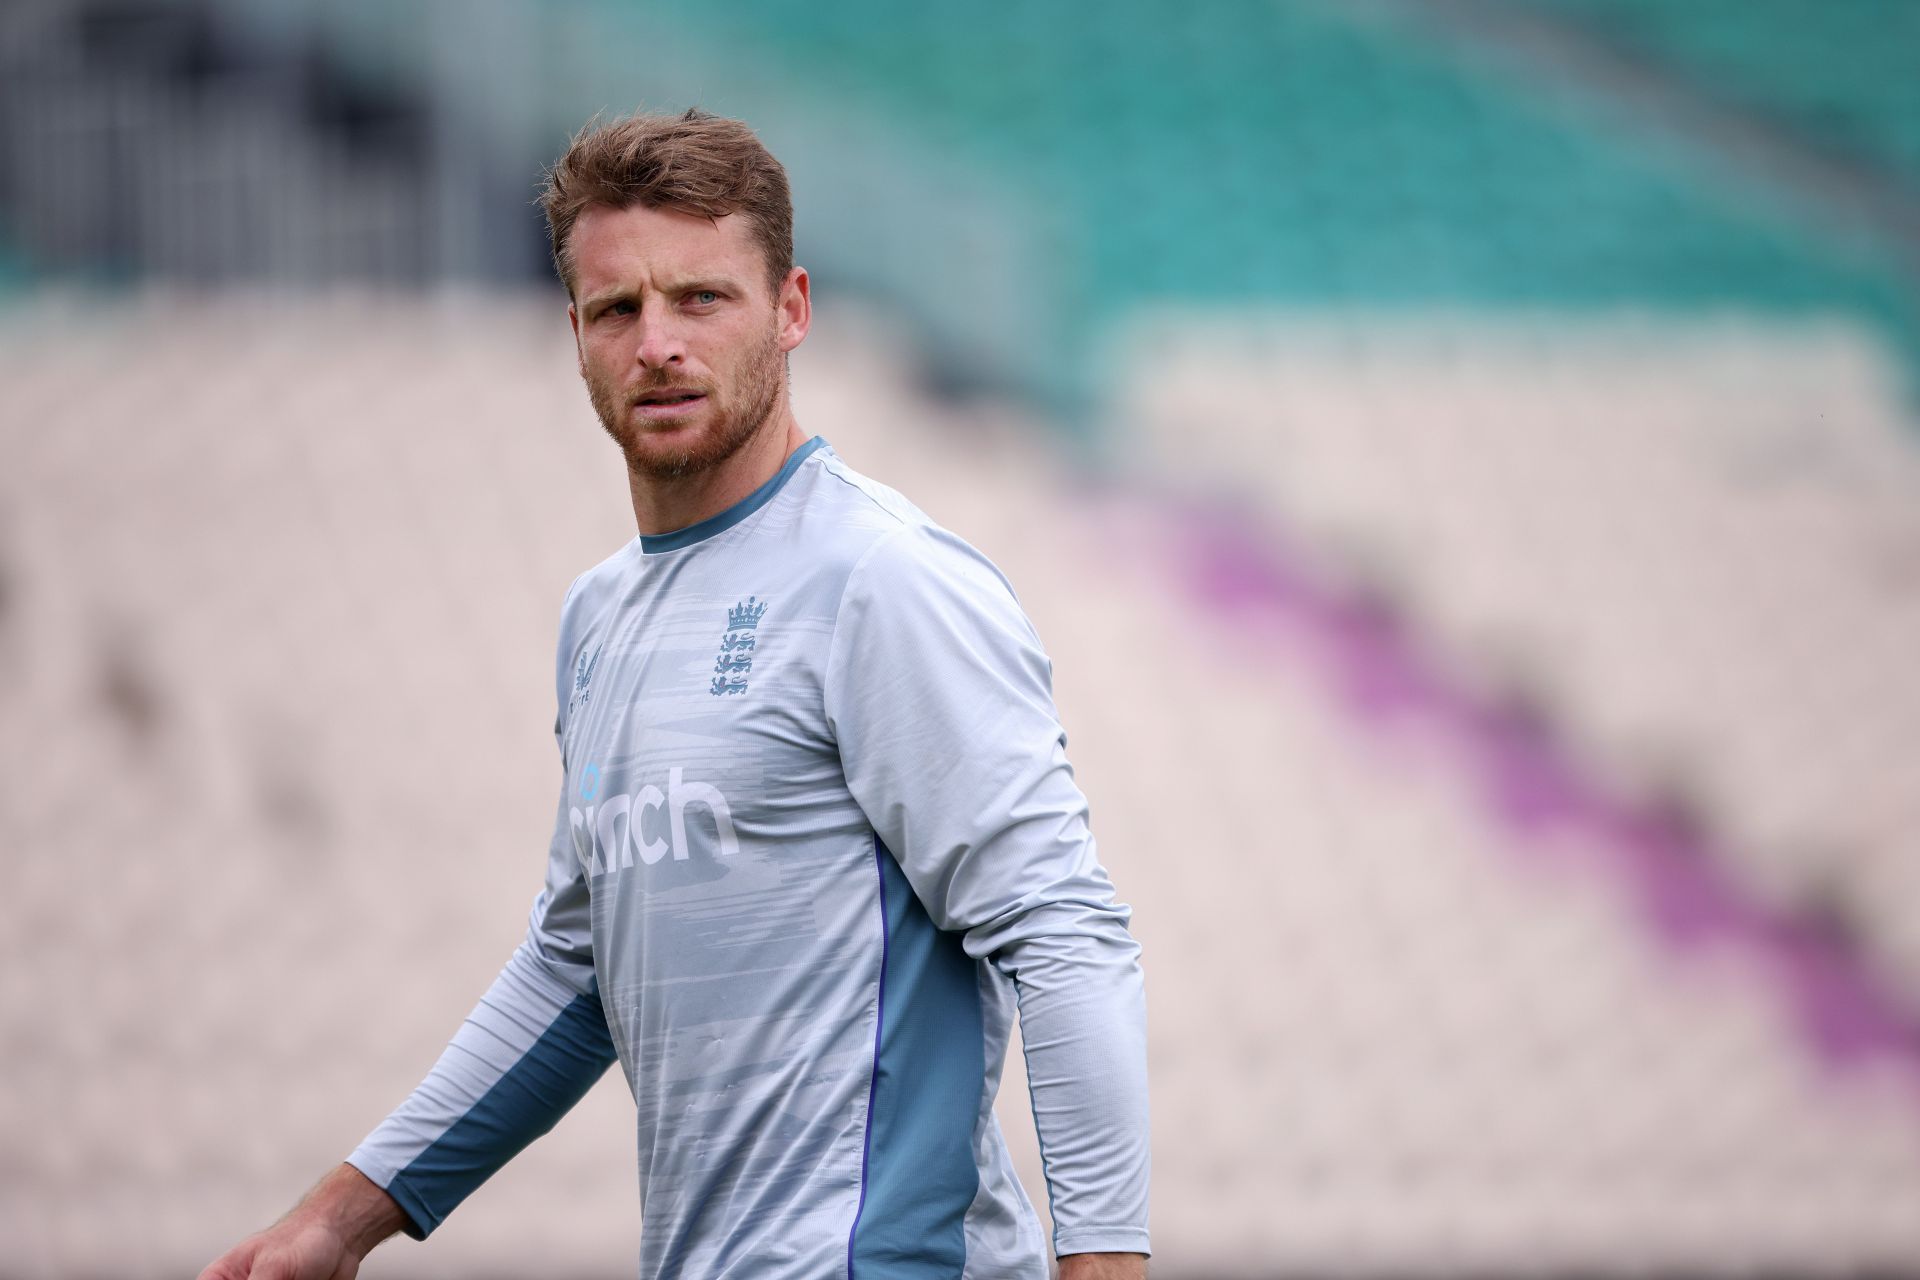 Jos Buttler will start his stint as full-time captain against India. (Credits: Getty)